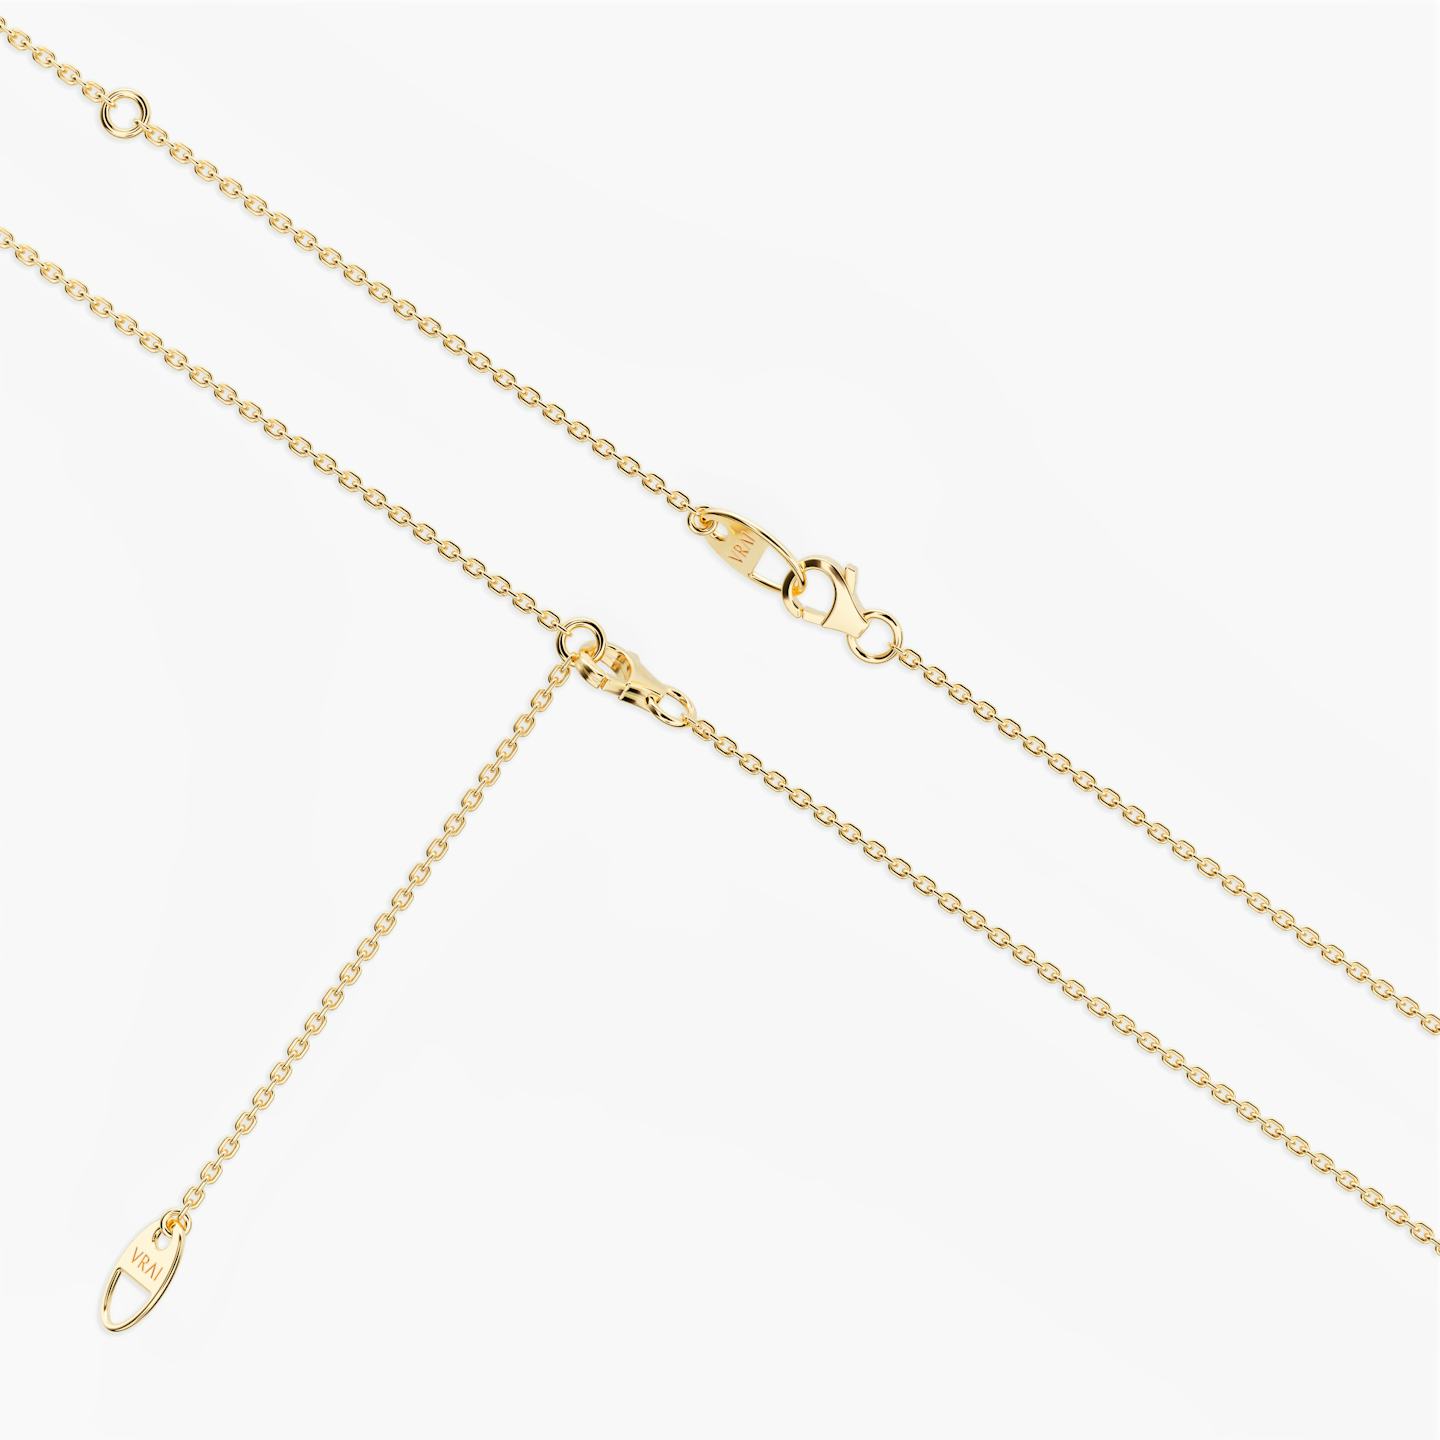 Floating Station Necklace | Round Brilliant | 14k | 18k Yellow Gold | Diamond count: 5 | Chain length: 16-18